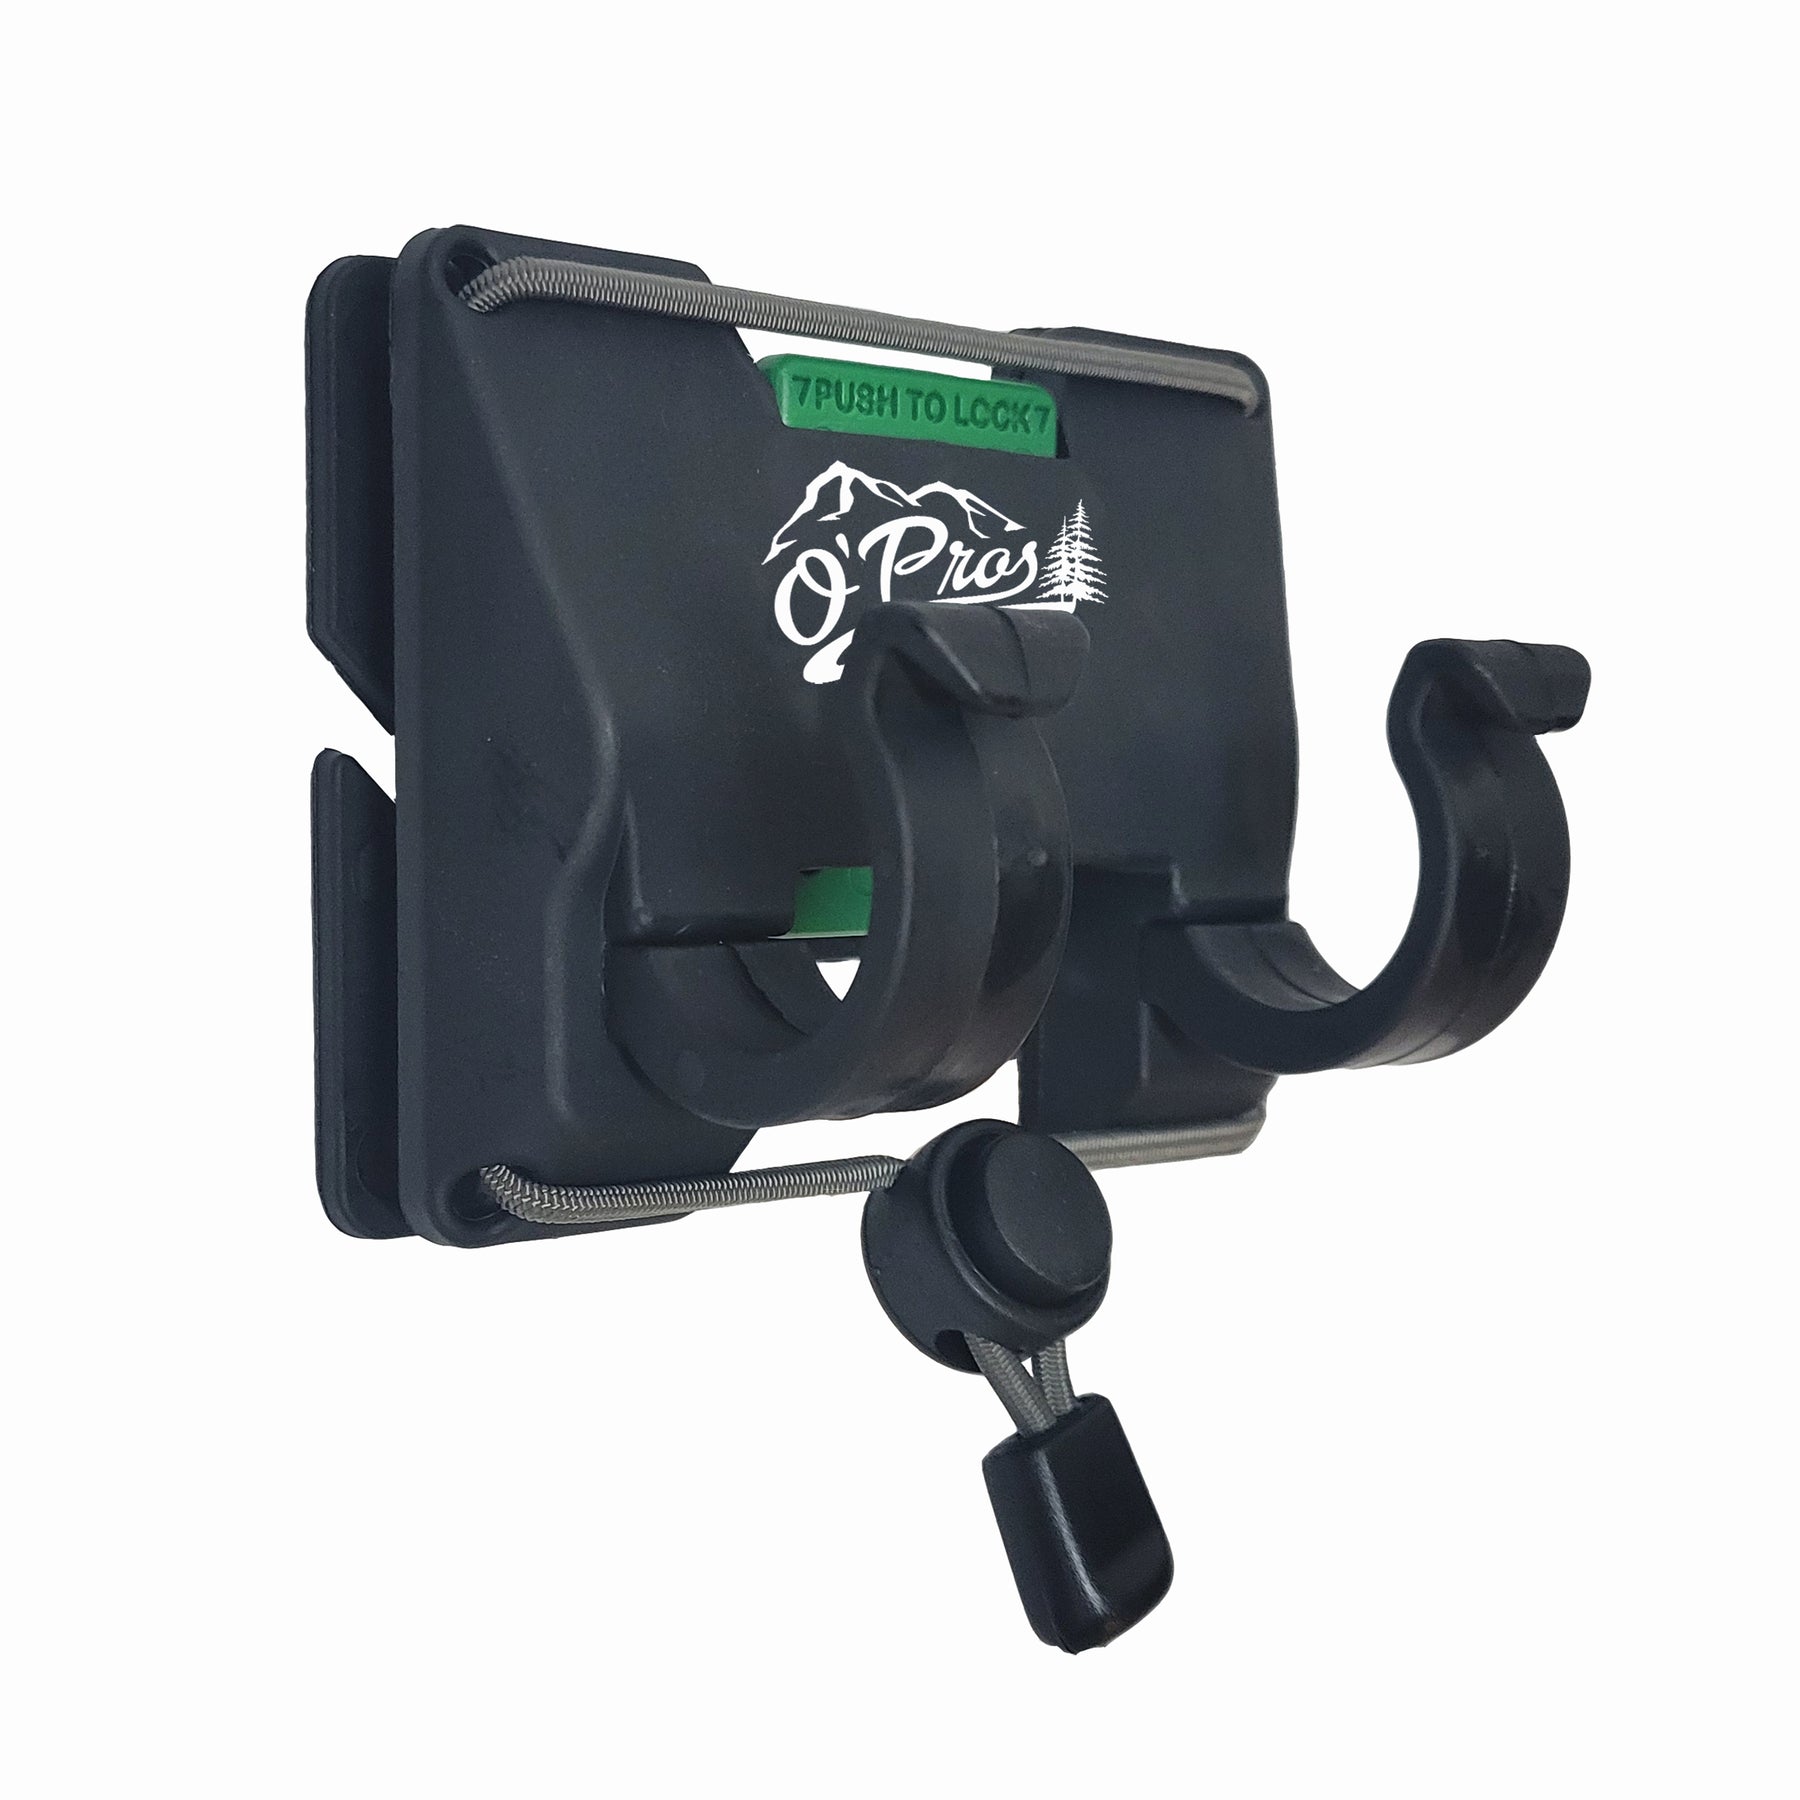 click for larger image  Fishing rod holder, Fly fishing rods, Fly